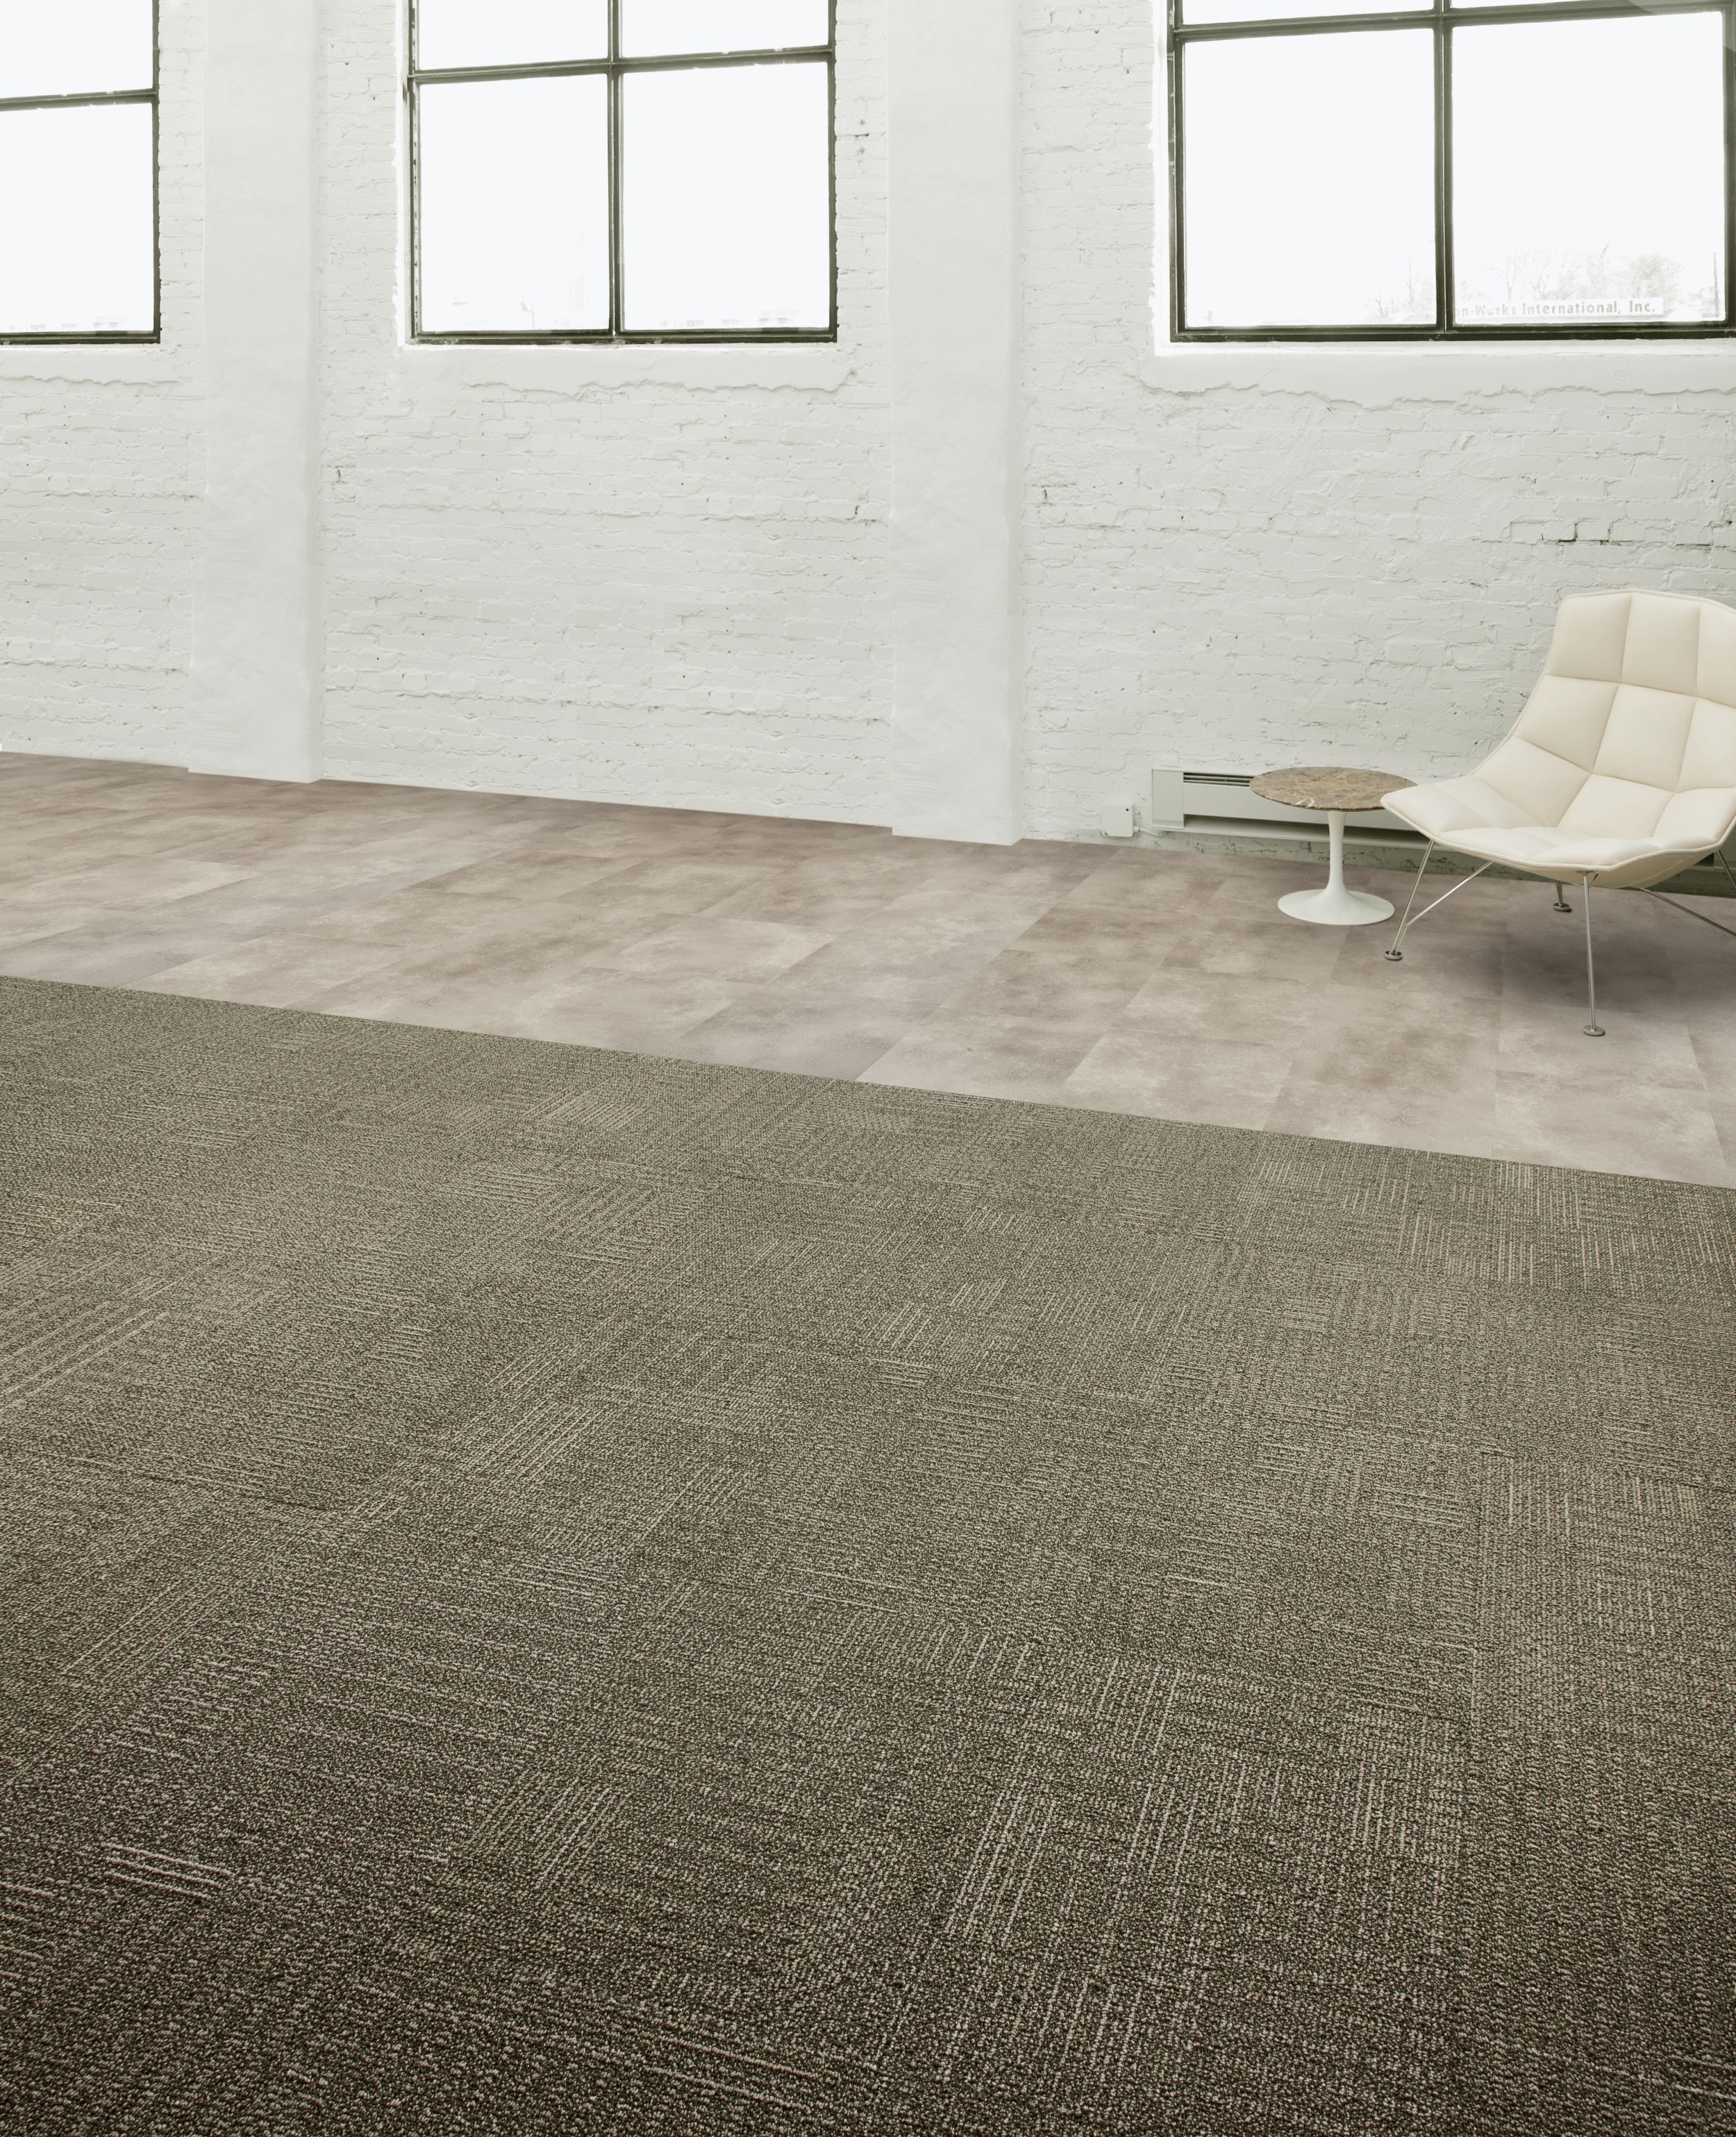 Interface CT101 carpet tile and Textured Stones LVT in open area with concrete walls and chair numéro d’image 5